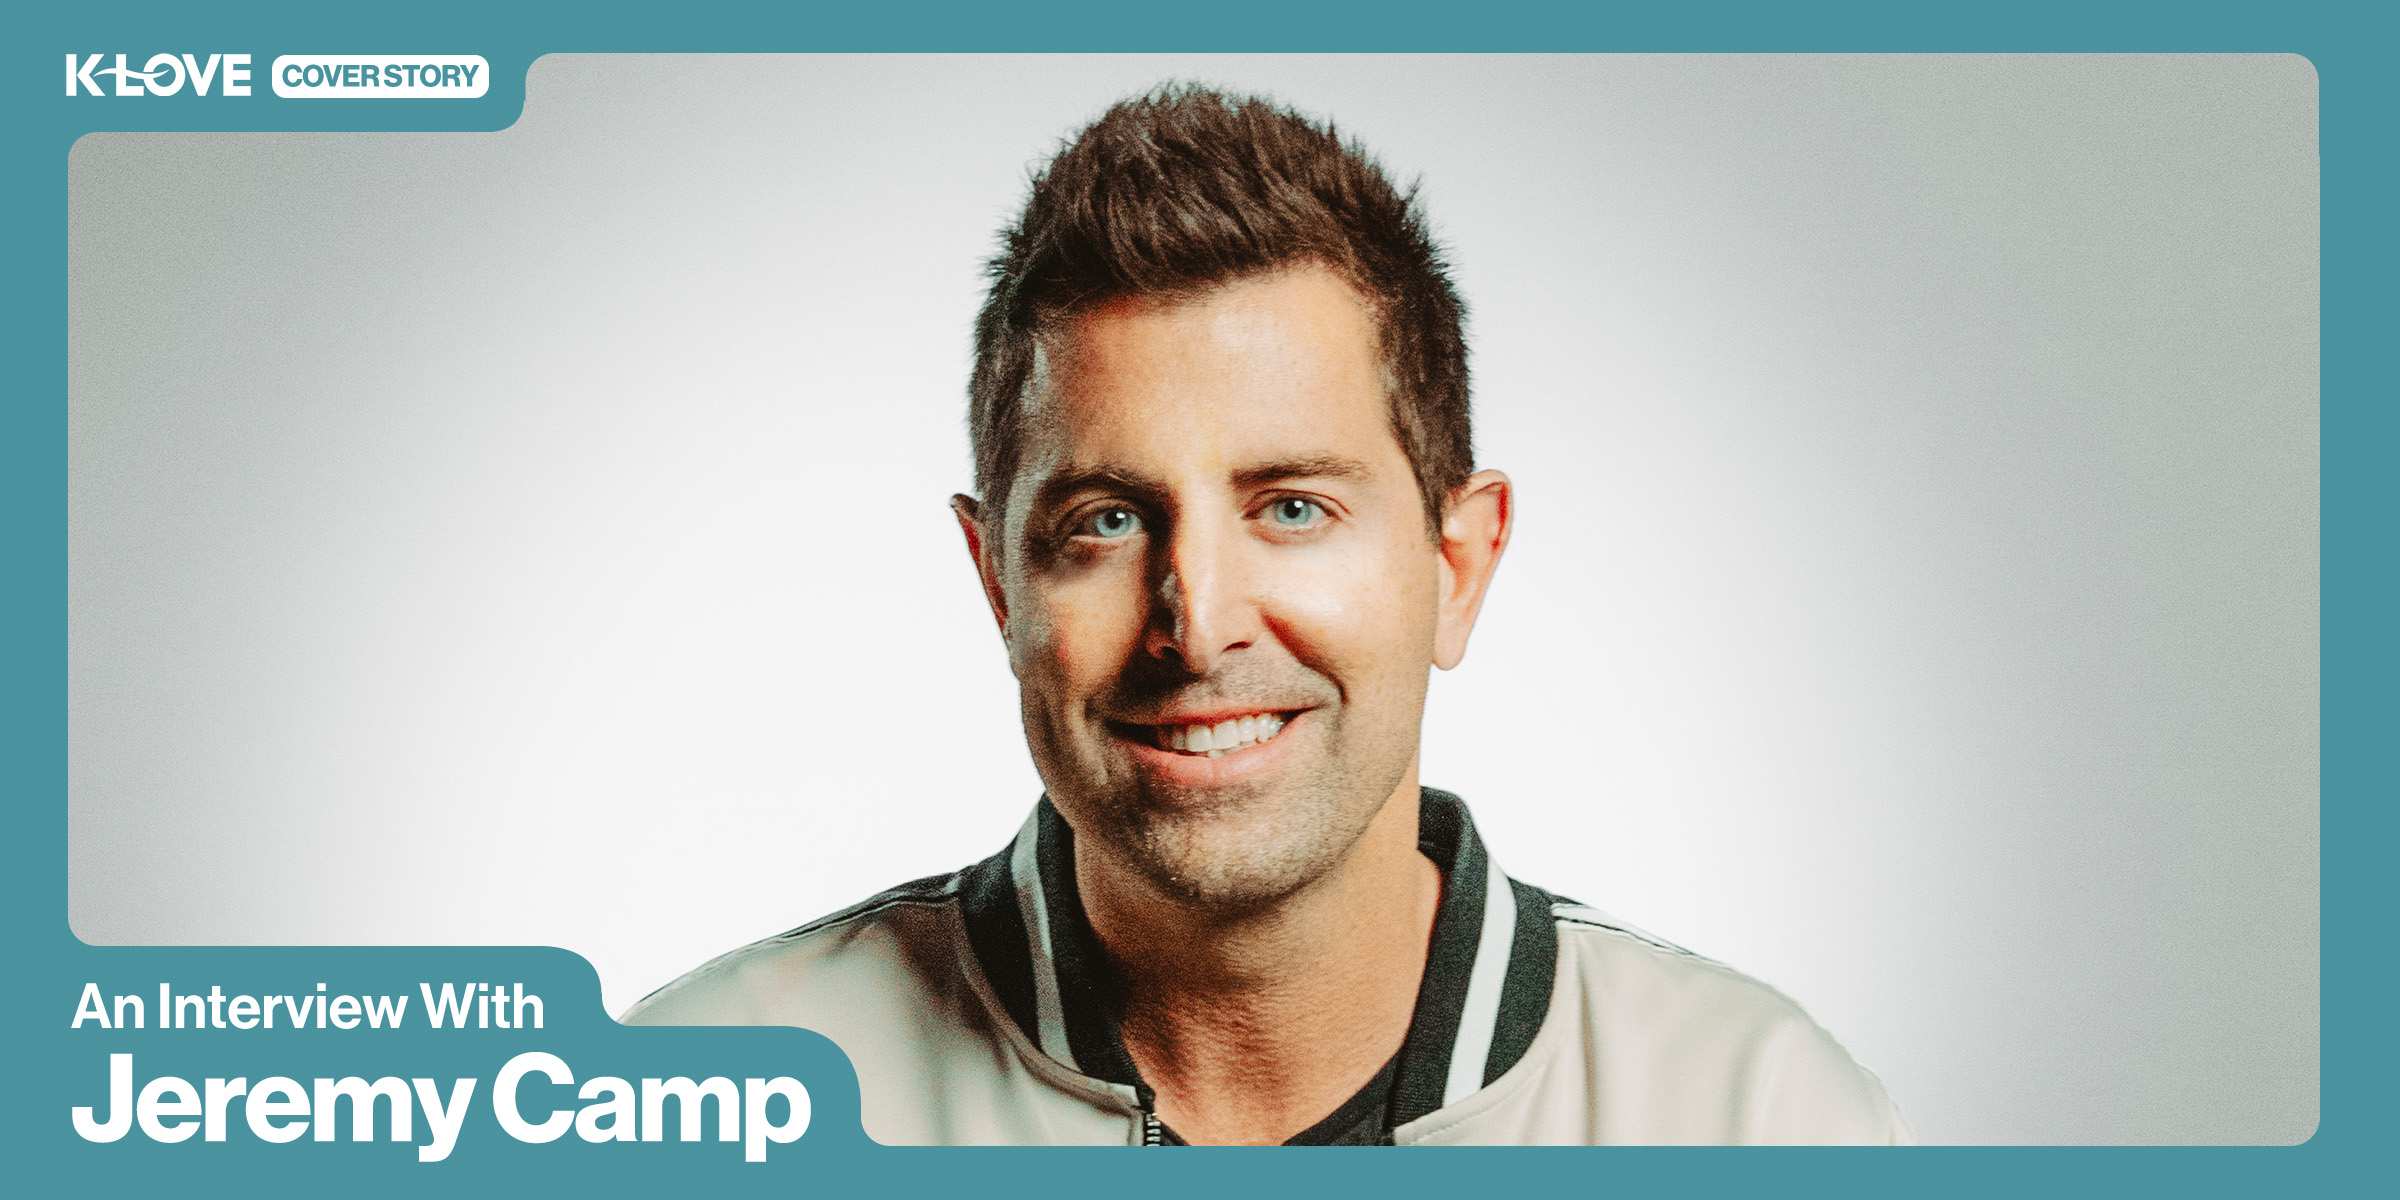 K-LOVE Cover Story: An Interview with Jeremy Camp